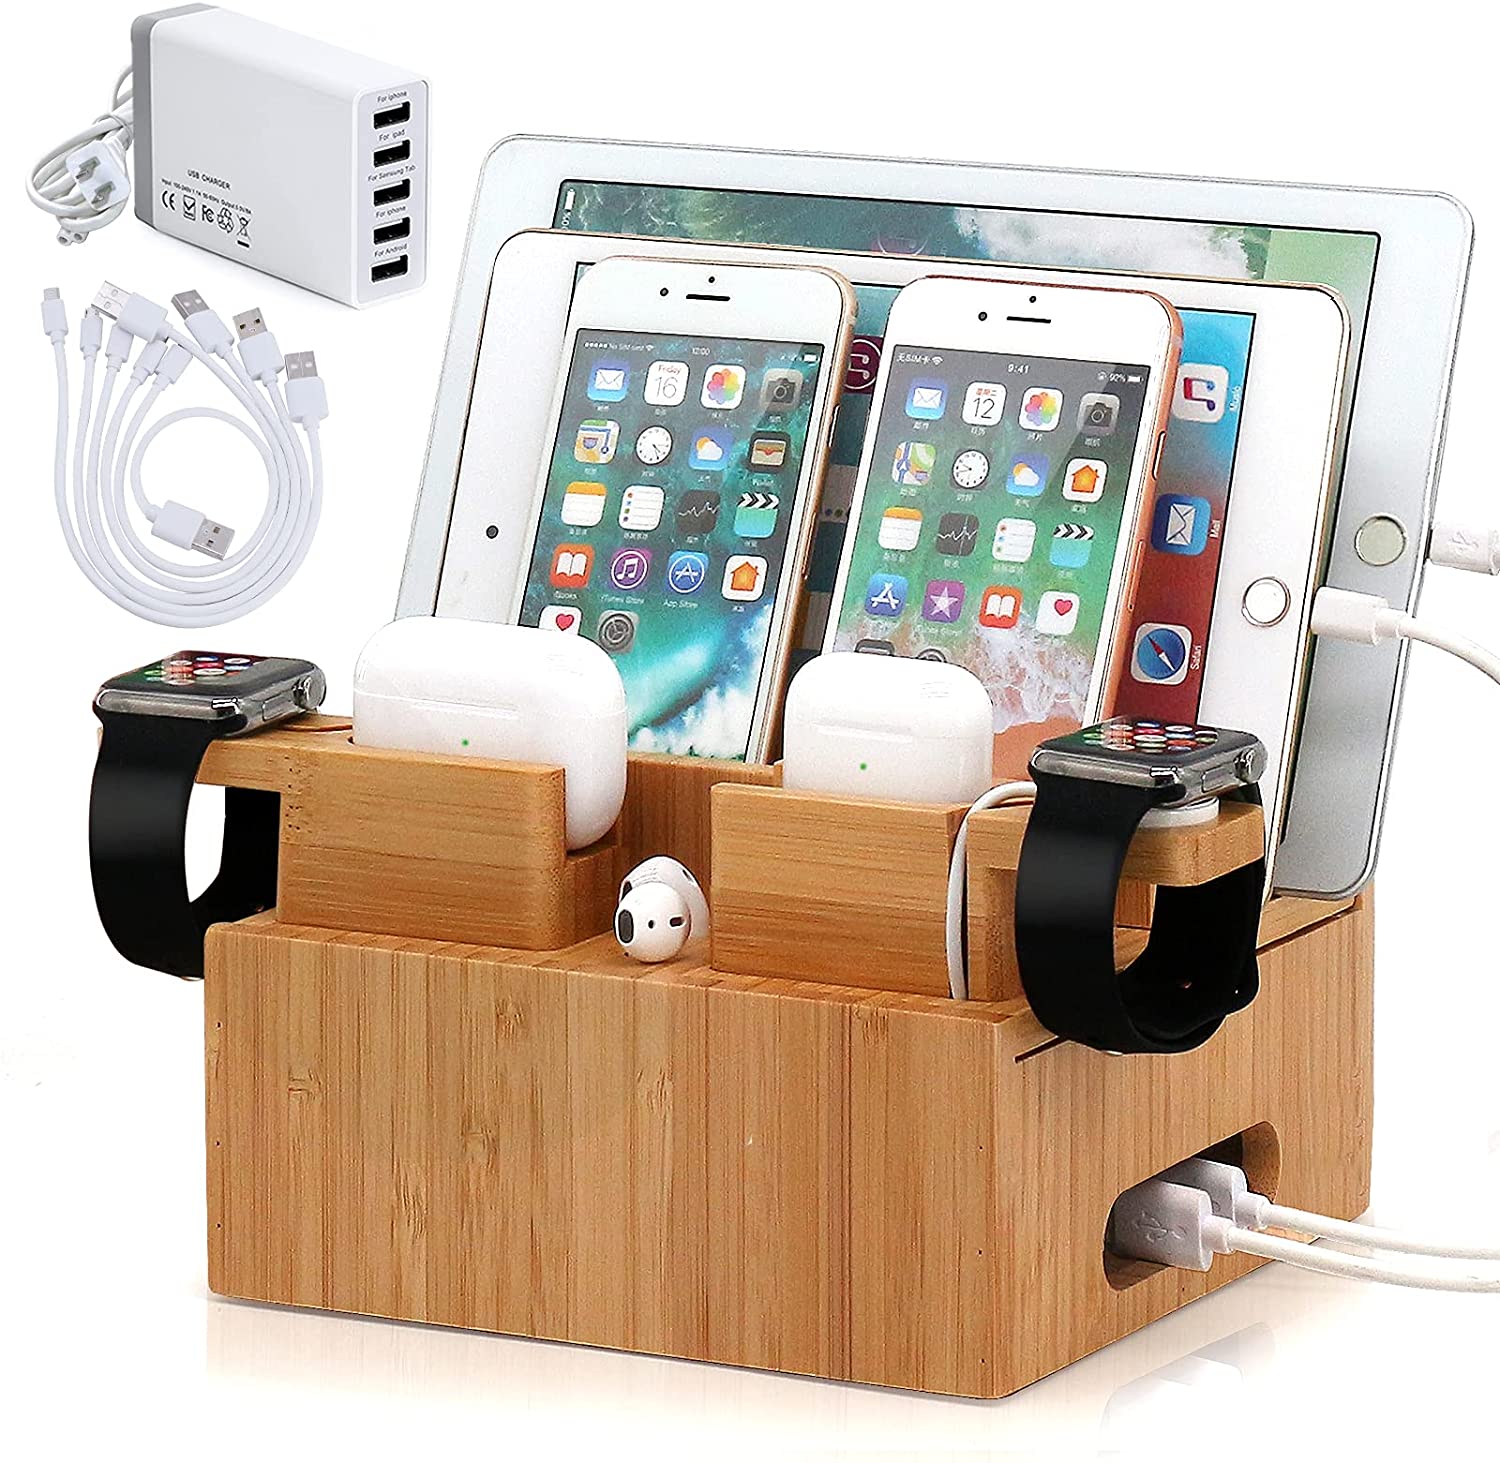 Image of Bamboo Charging Station Organizer For Multiple Devices